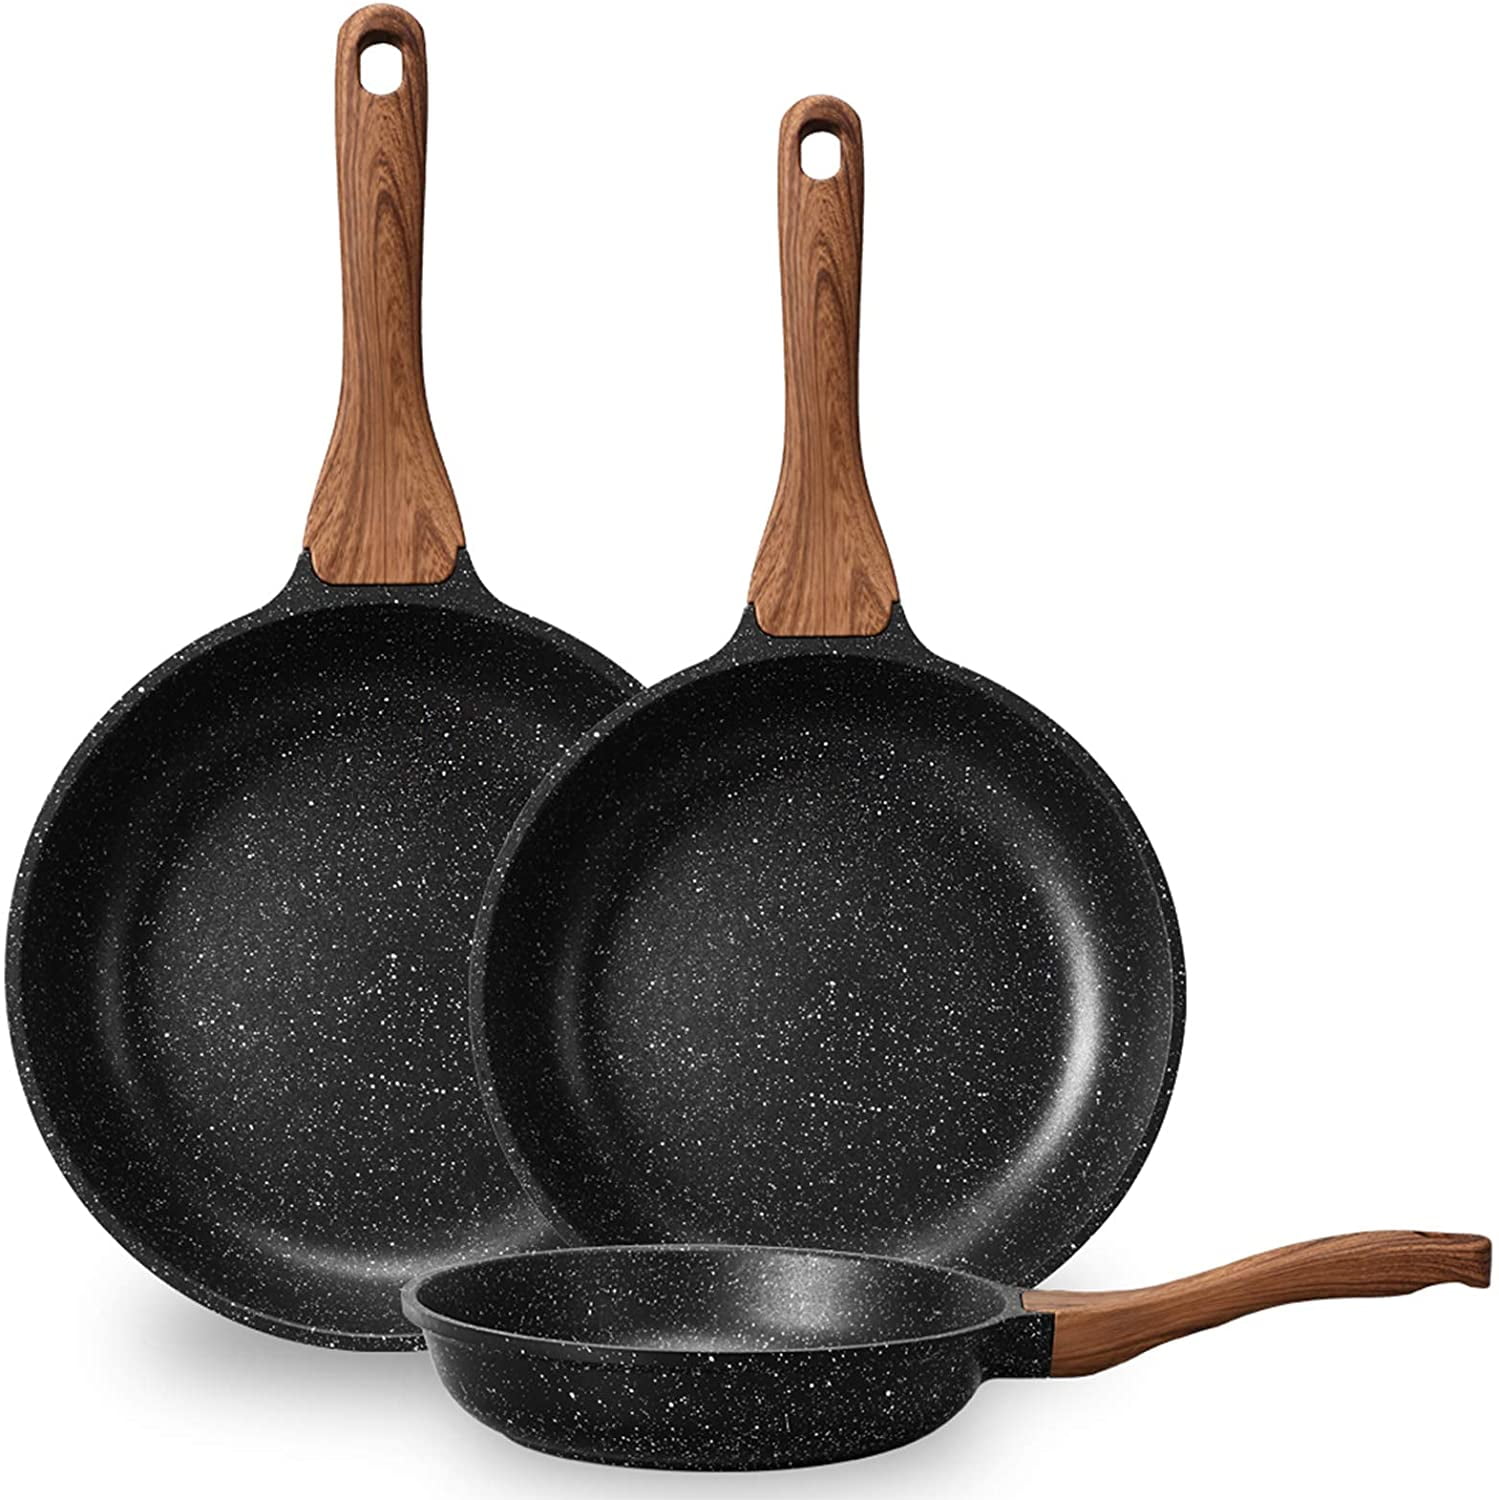 YIIFEEO Frying Pans Nonstick, Induction Frying Pan Set Granite Skillet Pans  for Cooking Omelette Pan Cookware Set with Heat-Resistant Handle